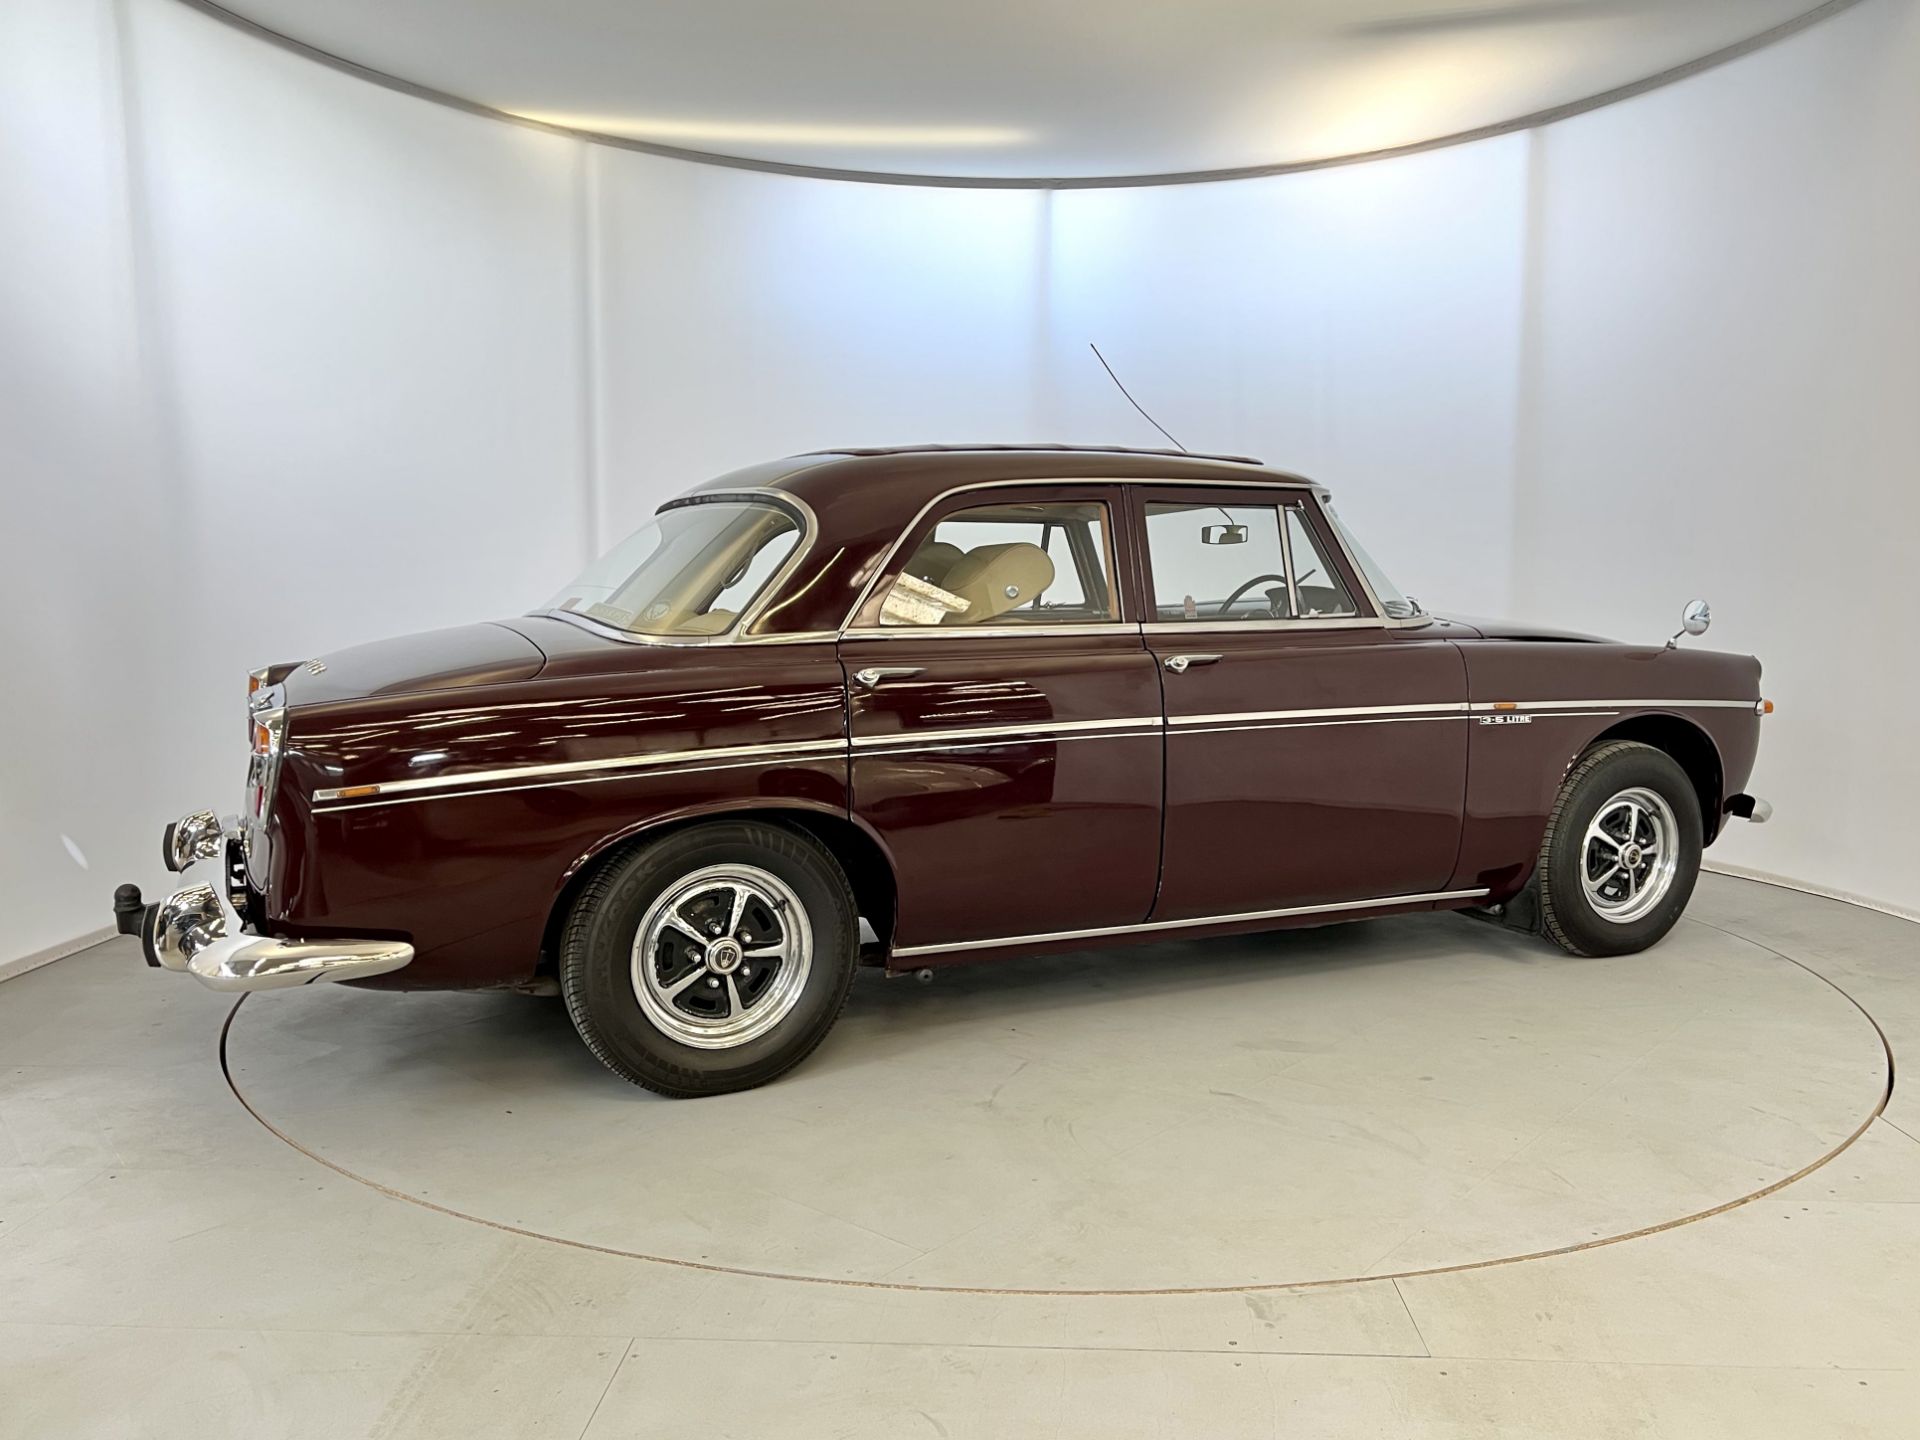 Rover 3.5 Saloon - Image 10 of 39